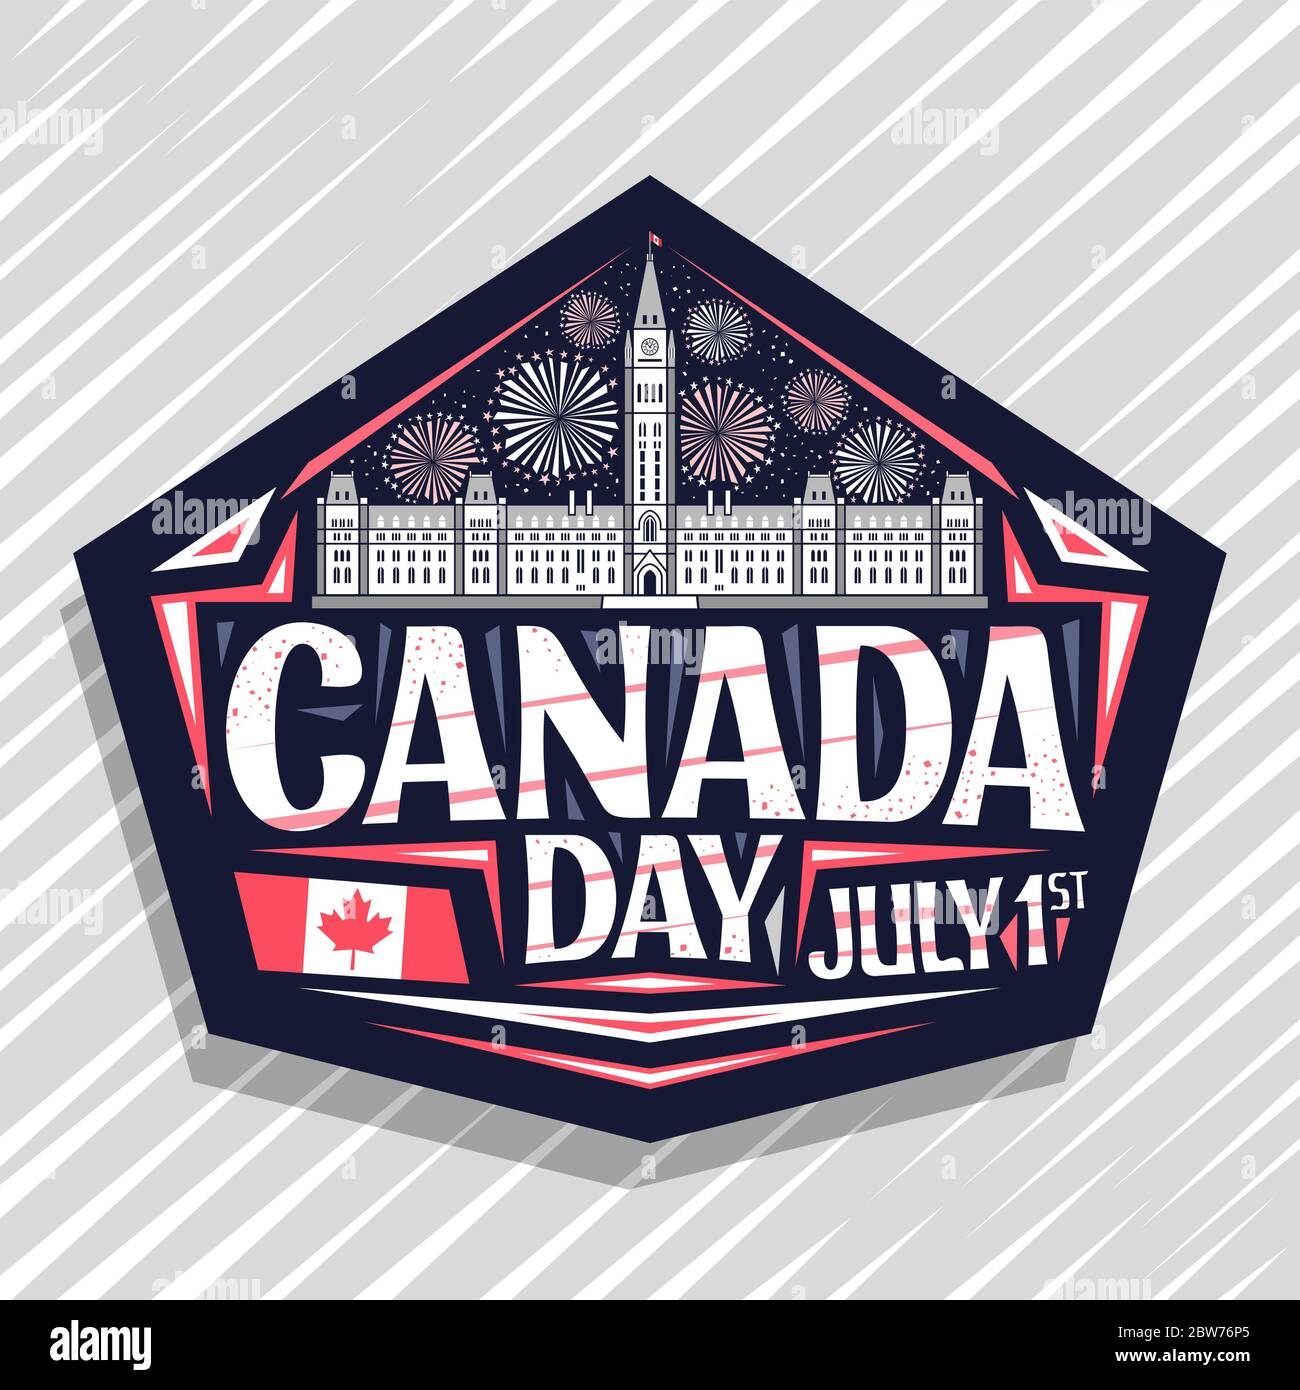 Vector logo for Canada Day, dark decorative stamp with illustration of Parliament Hill in Ottawa and Canadian flag, unique letters for words canada da Stock Vector